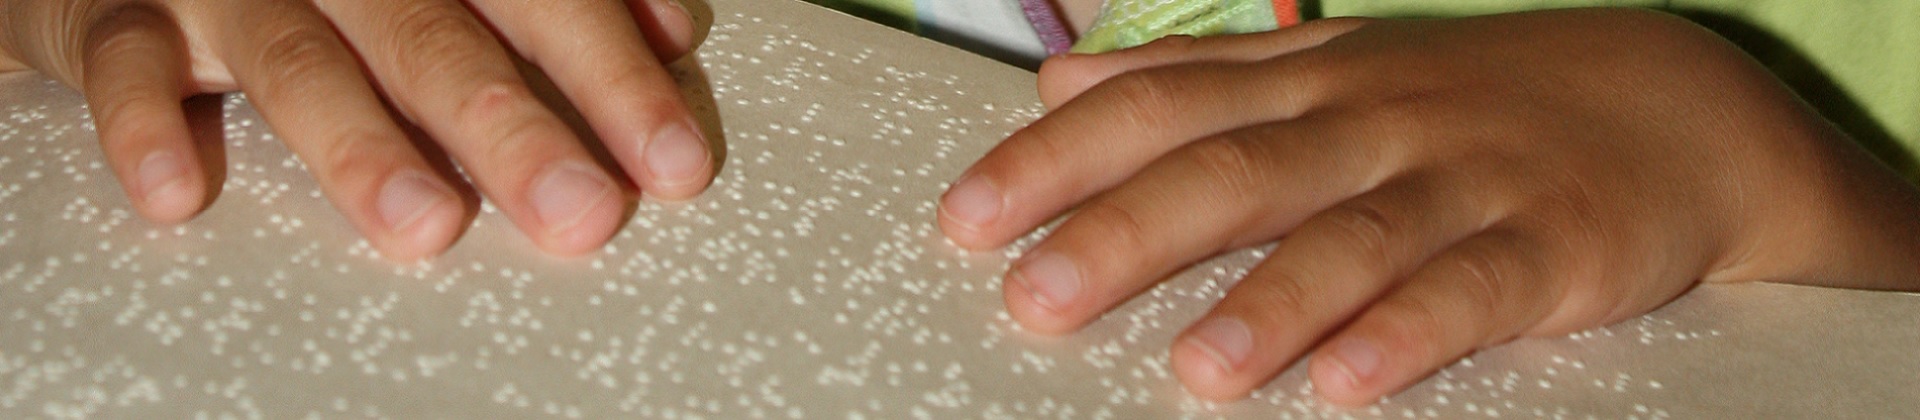  A child's hands on a Braille book.